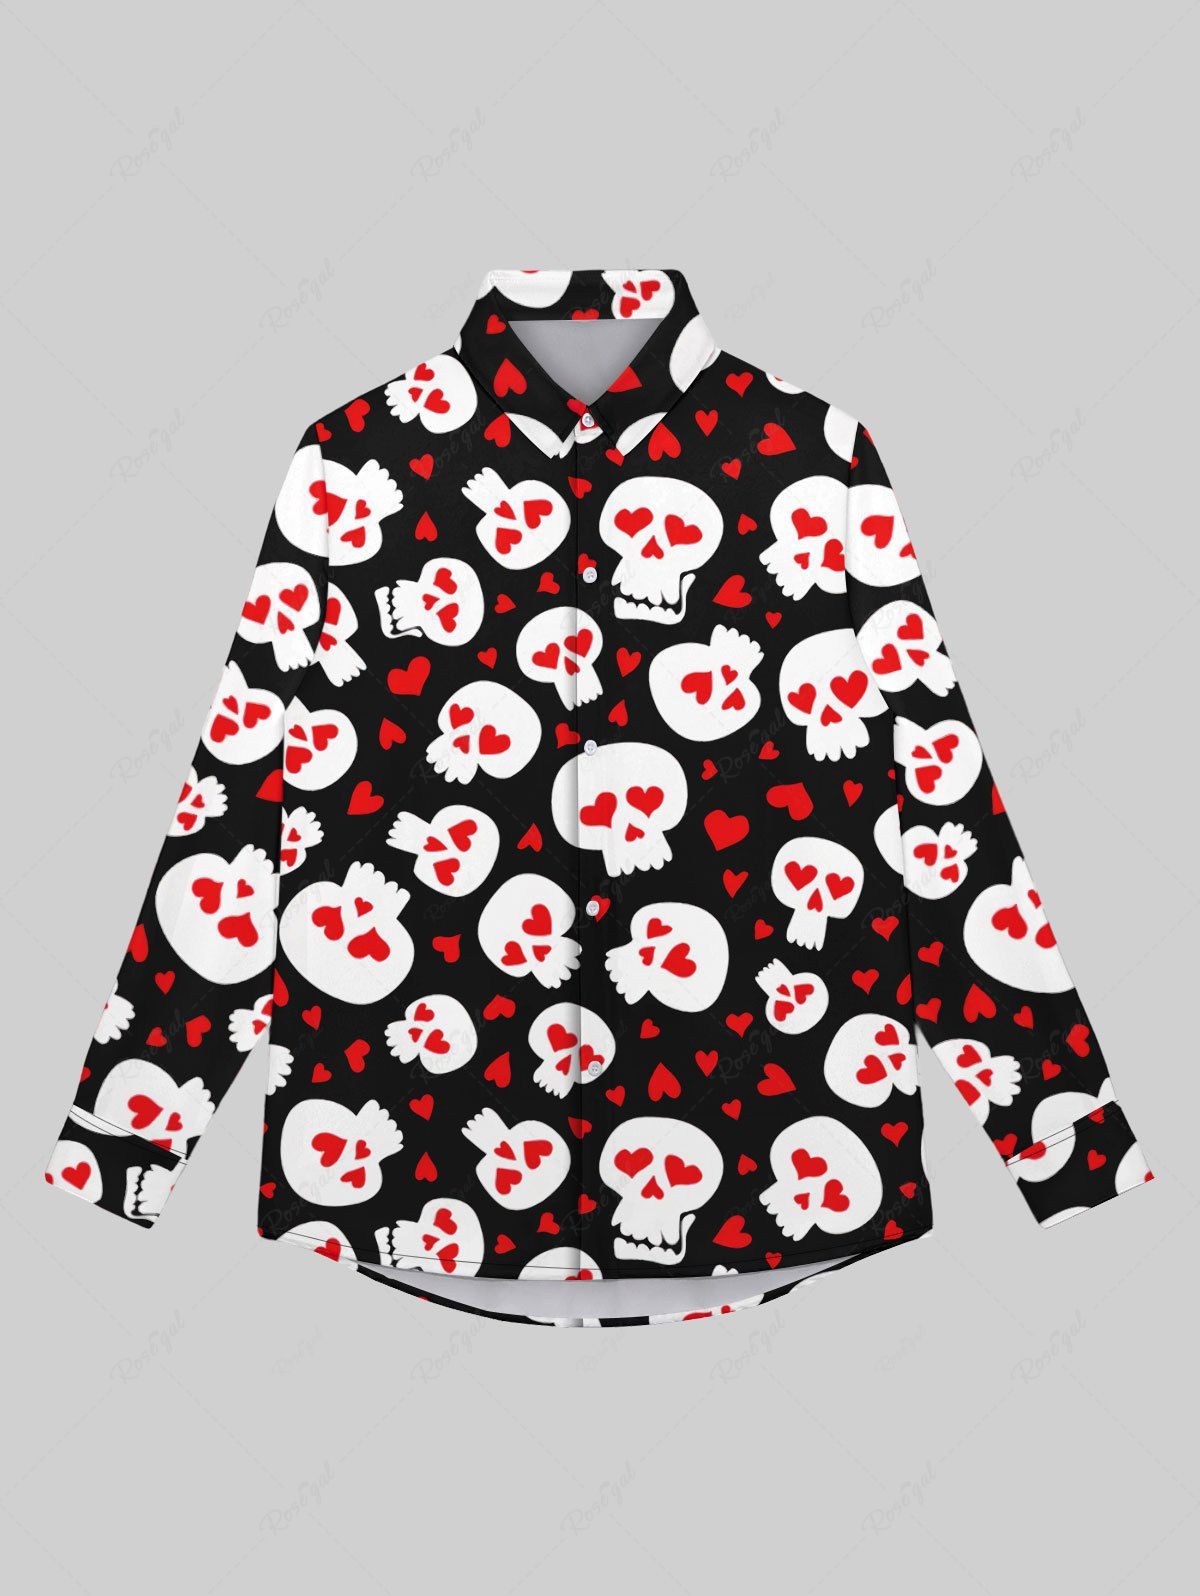 Store Gothic Turn-down Collar Skulls Heart Print Valentines Buttons Shirt For Men  